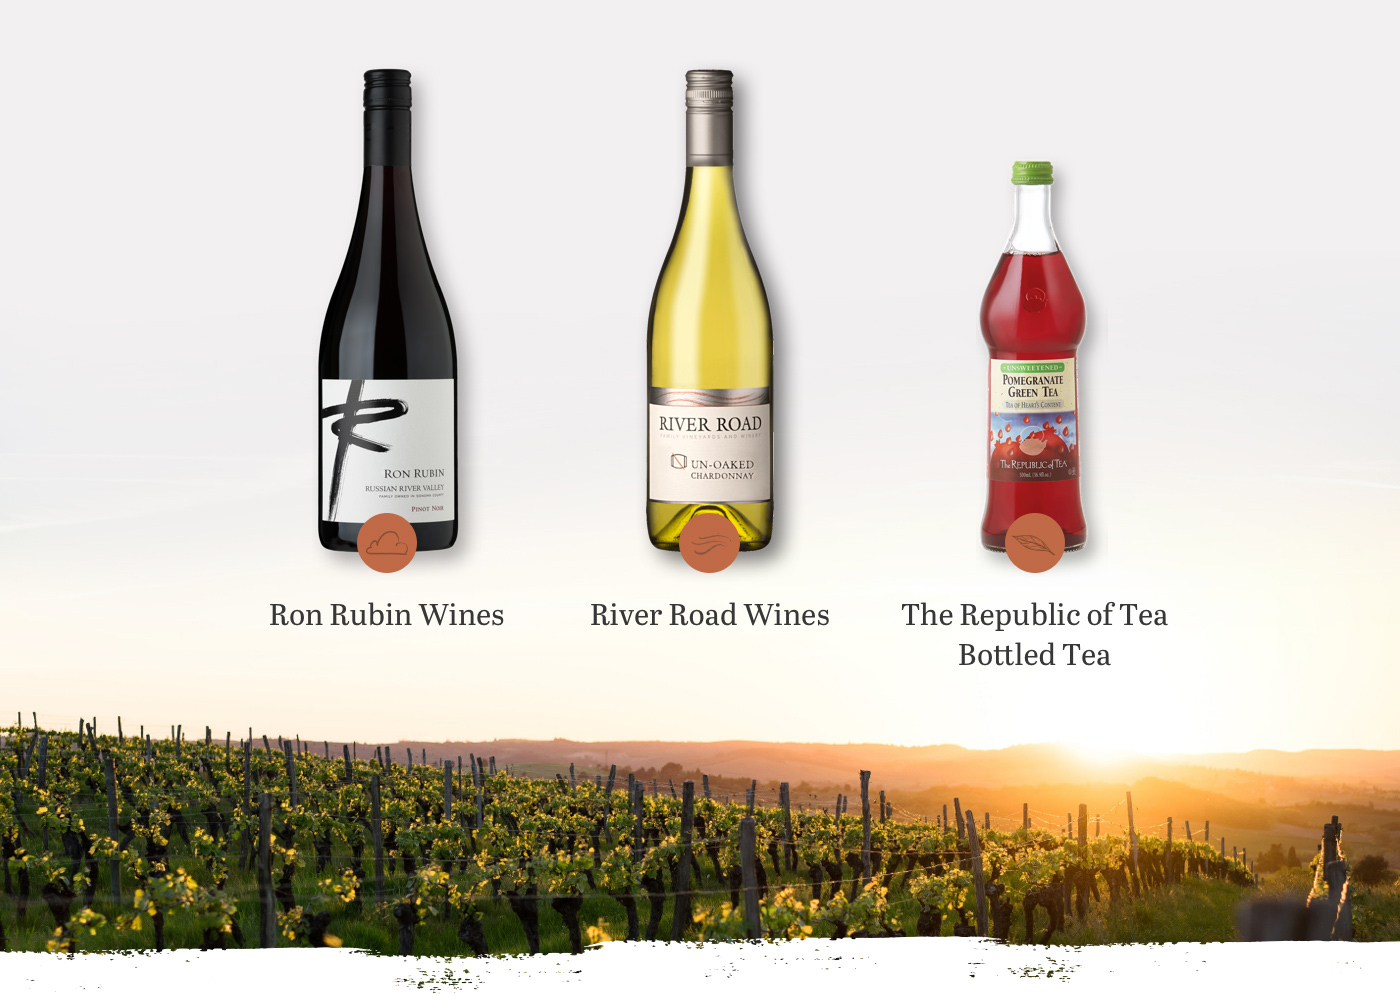 Ron Rubin's three product lines: Ron Rubin Wines, River Road Wines and The Republic of Tea Bottled Teas